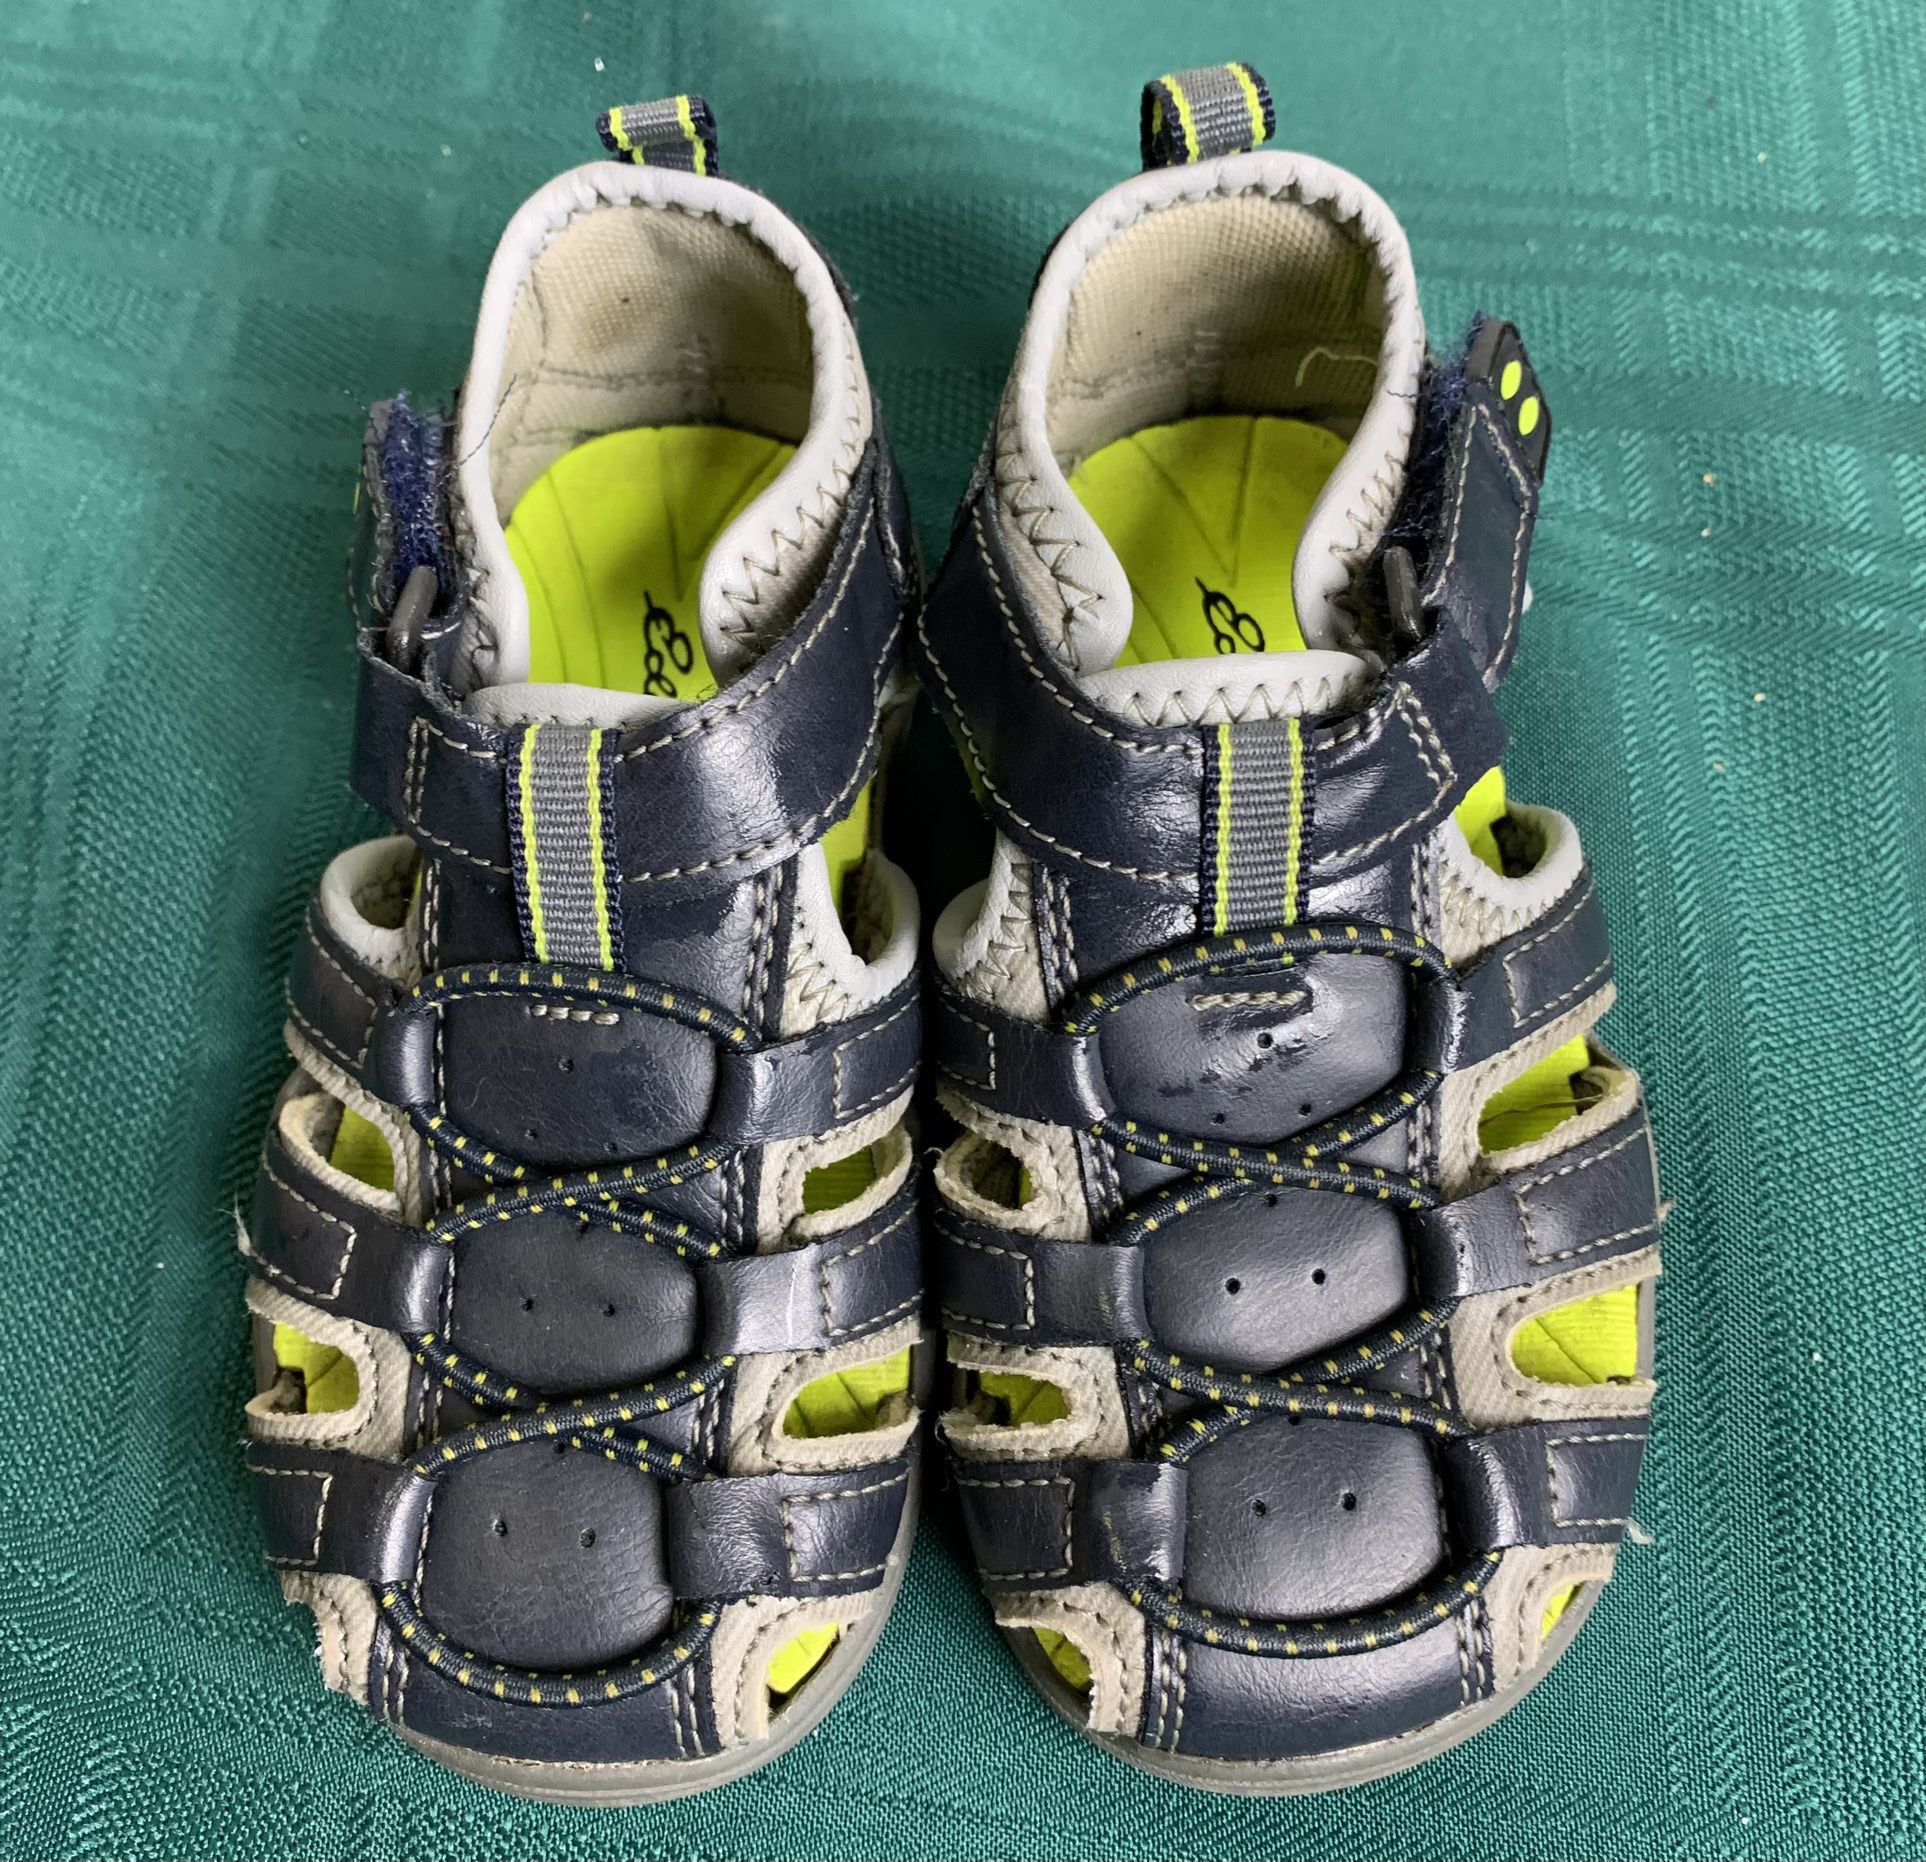 Eddie Bauer Toddler Boy Size 7 keen style closed toes Sandals Shoes 